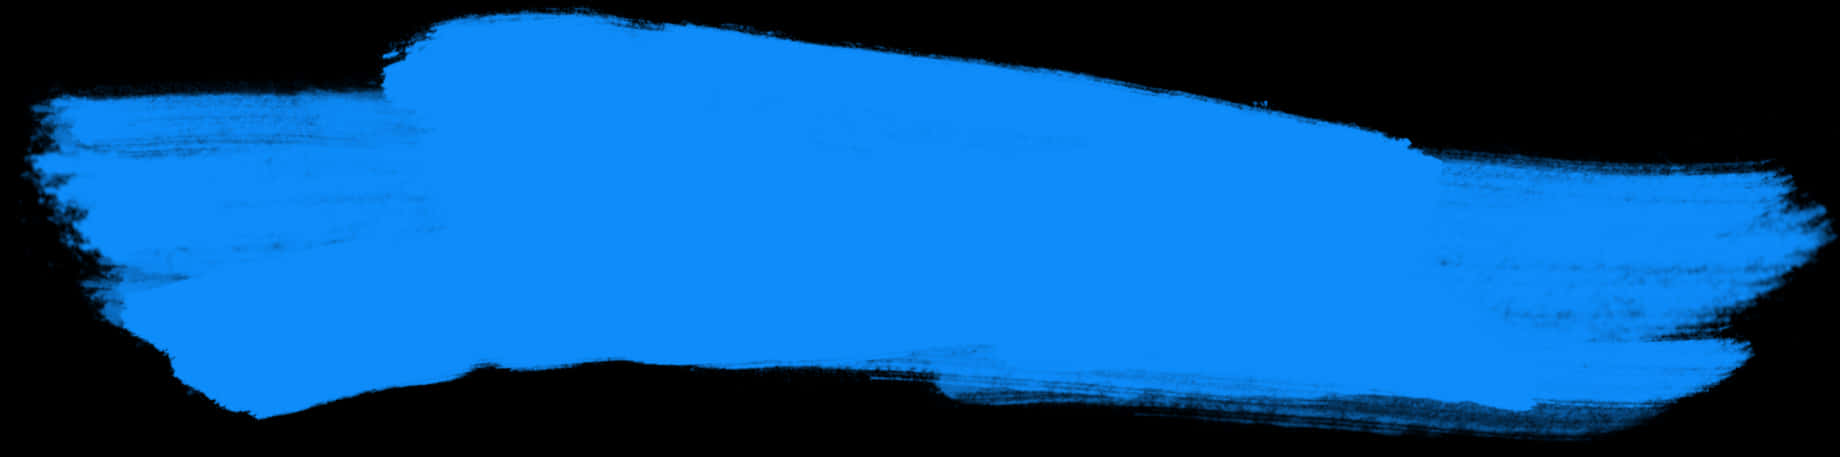 A Blue Rectangular Object With Black Background